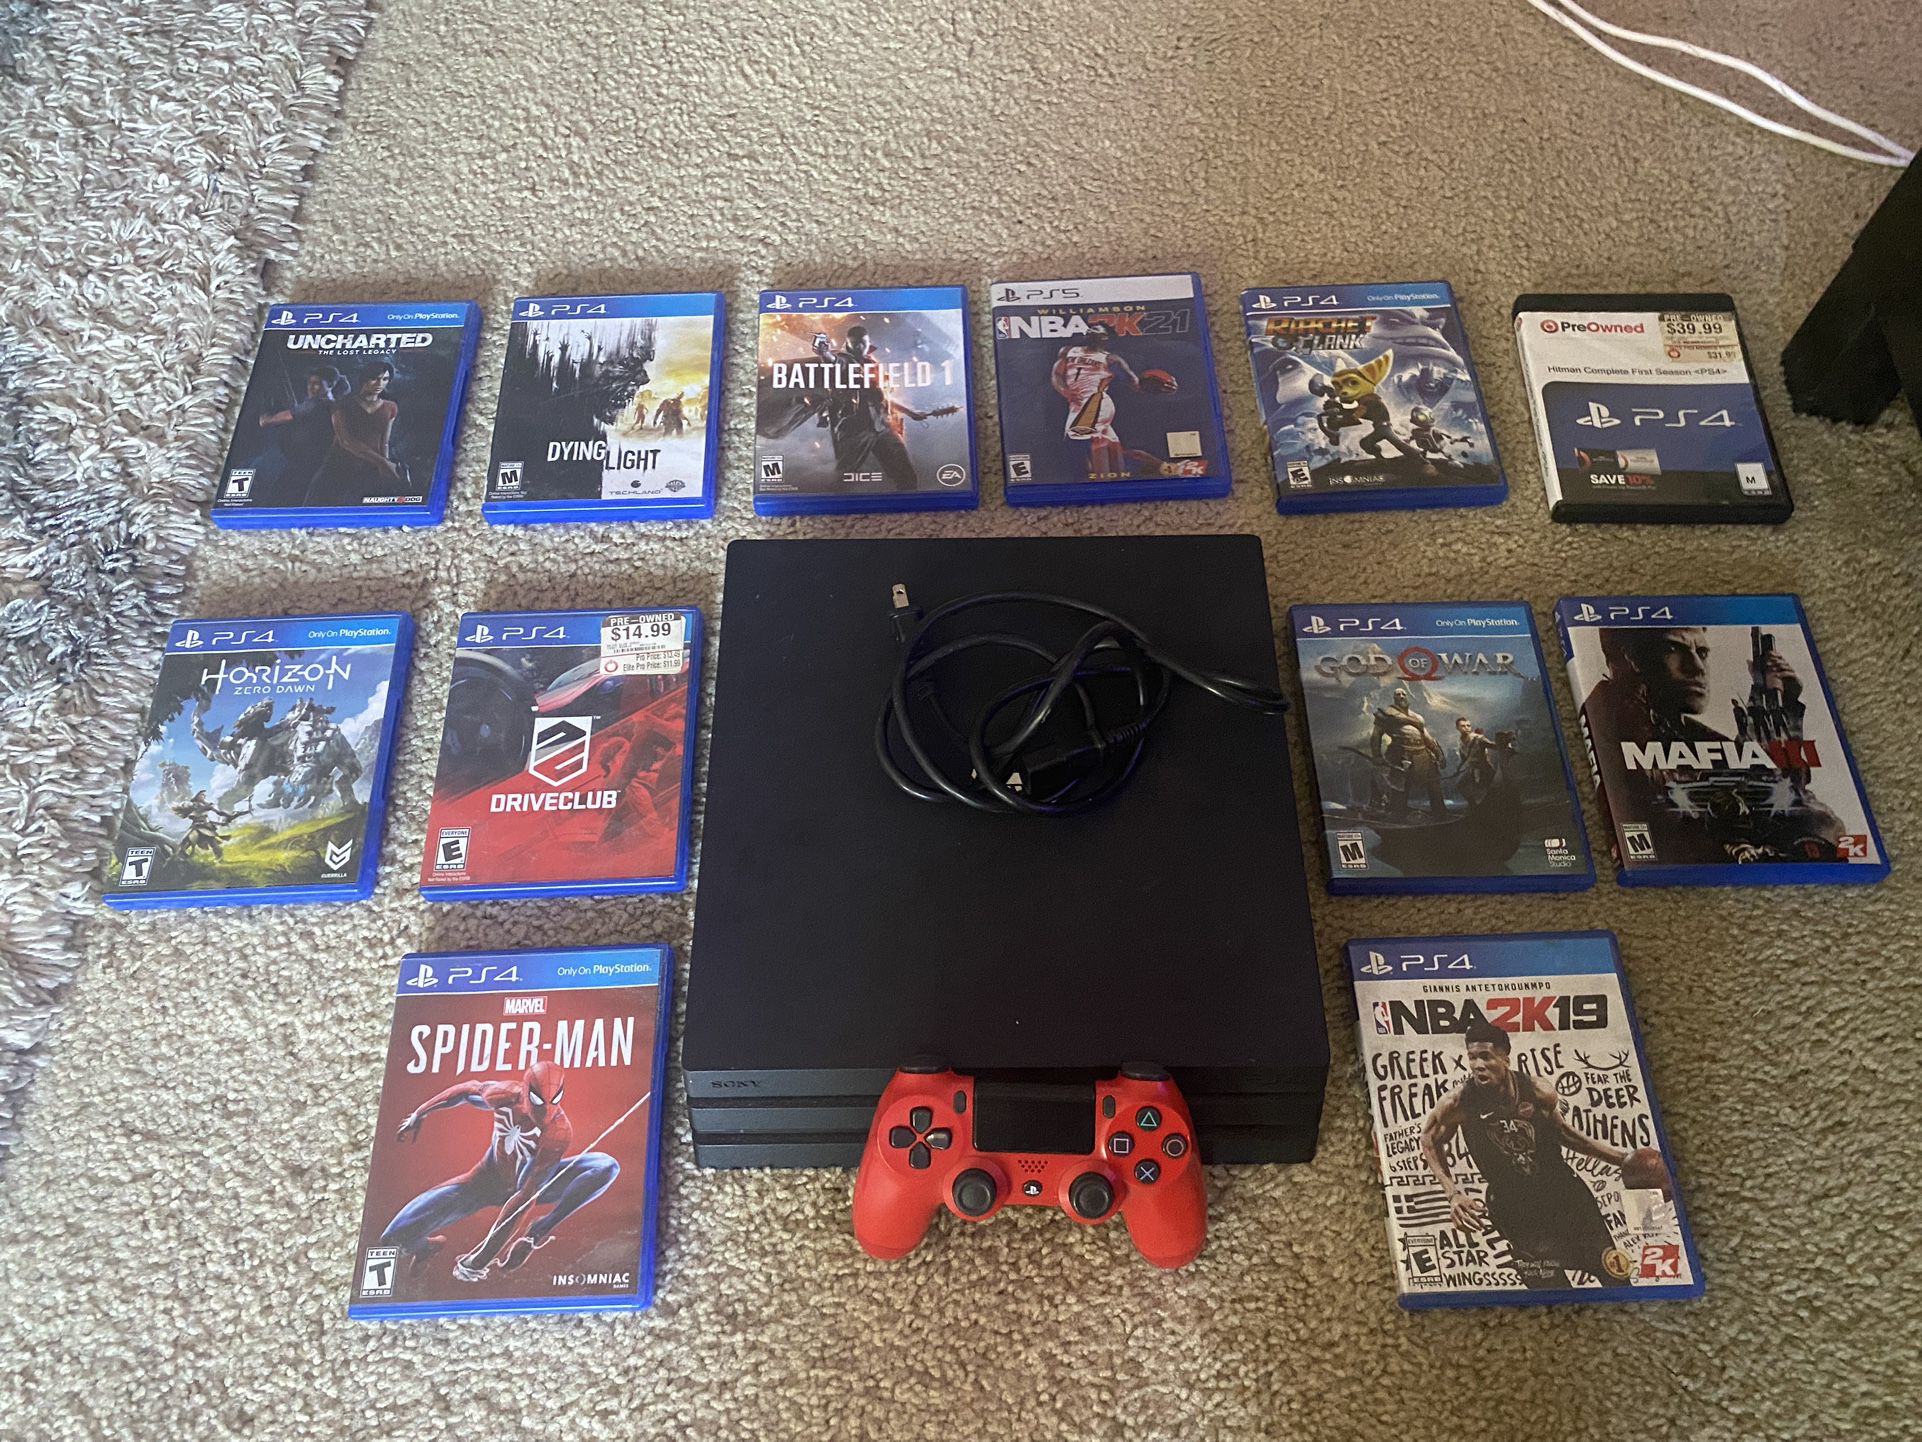 Sony Playstation Ps4 Pro 1tb Console Bundle With Games And Good Controllers  for Sale in Queens, NY - OfferUp